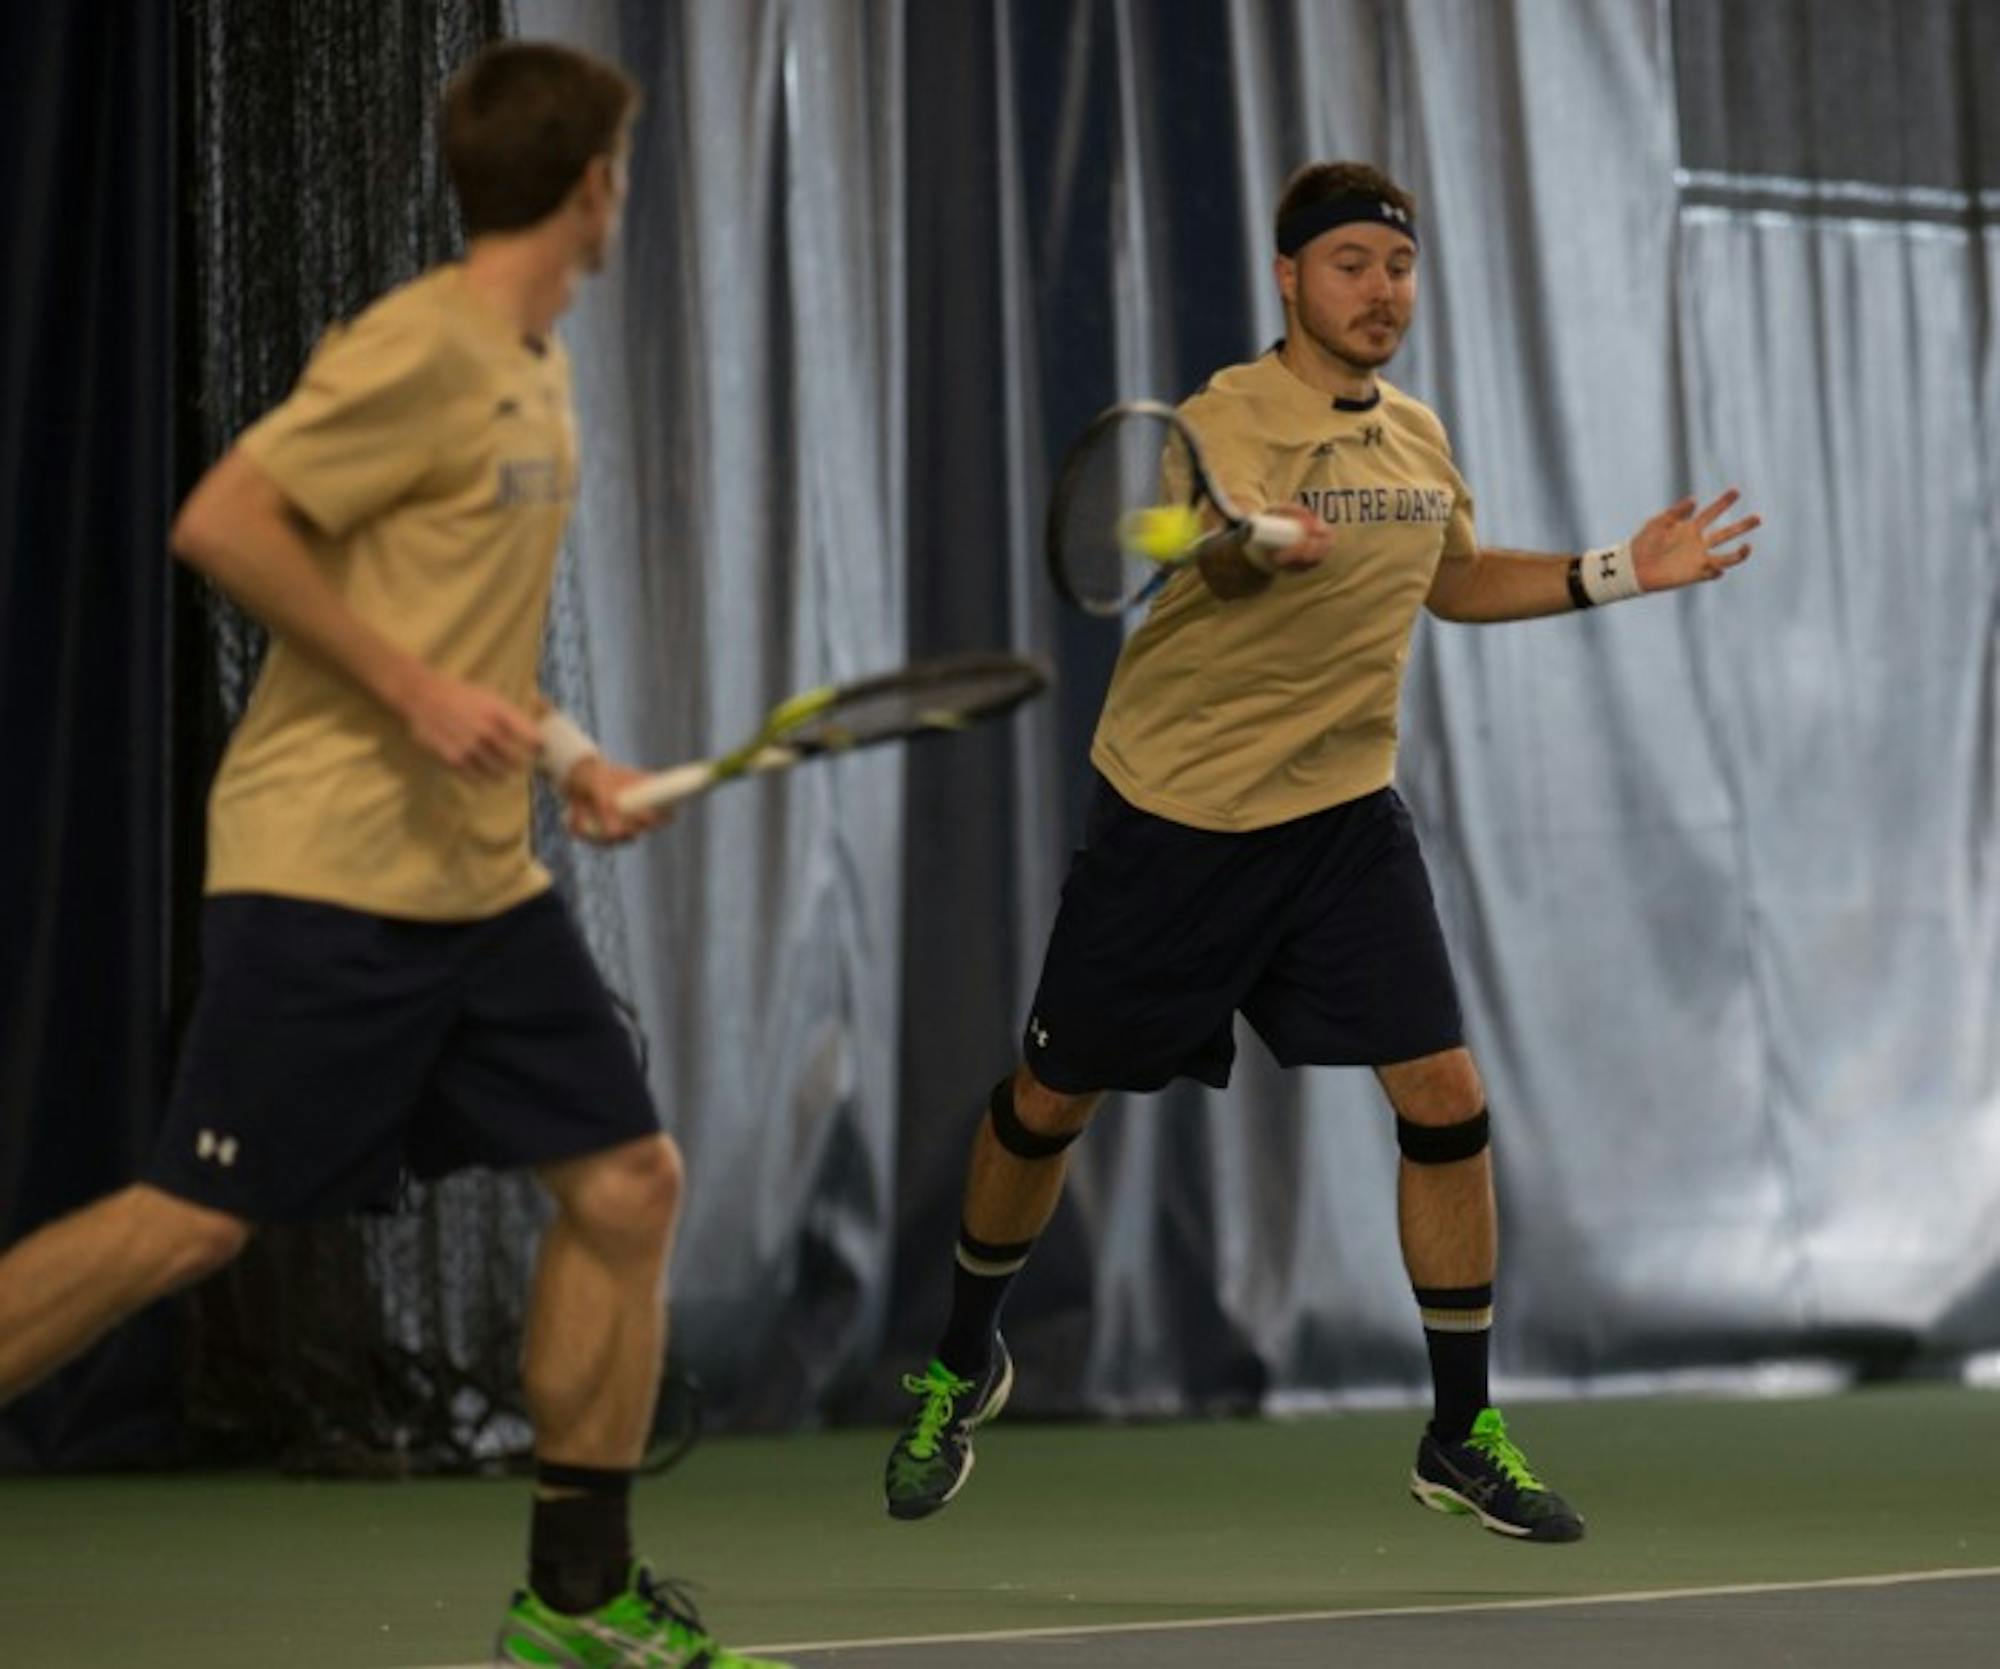 Irish senior Billy Pecor, right, connects on a shot during Notre Dame's 4-3 win over Oklahoma State on Jan. 24 at Eck Tennis Pavilion.